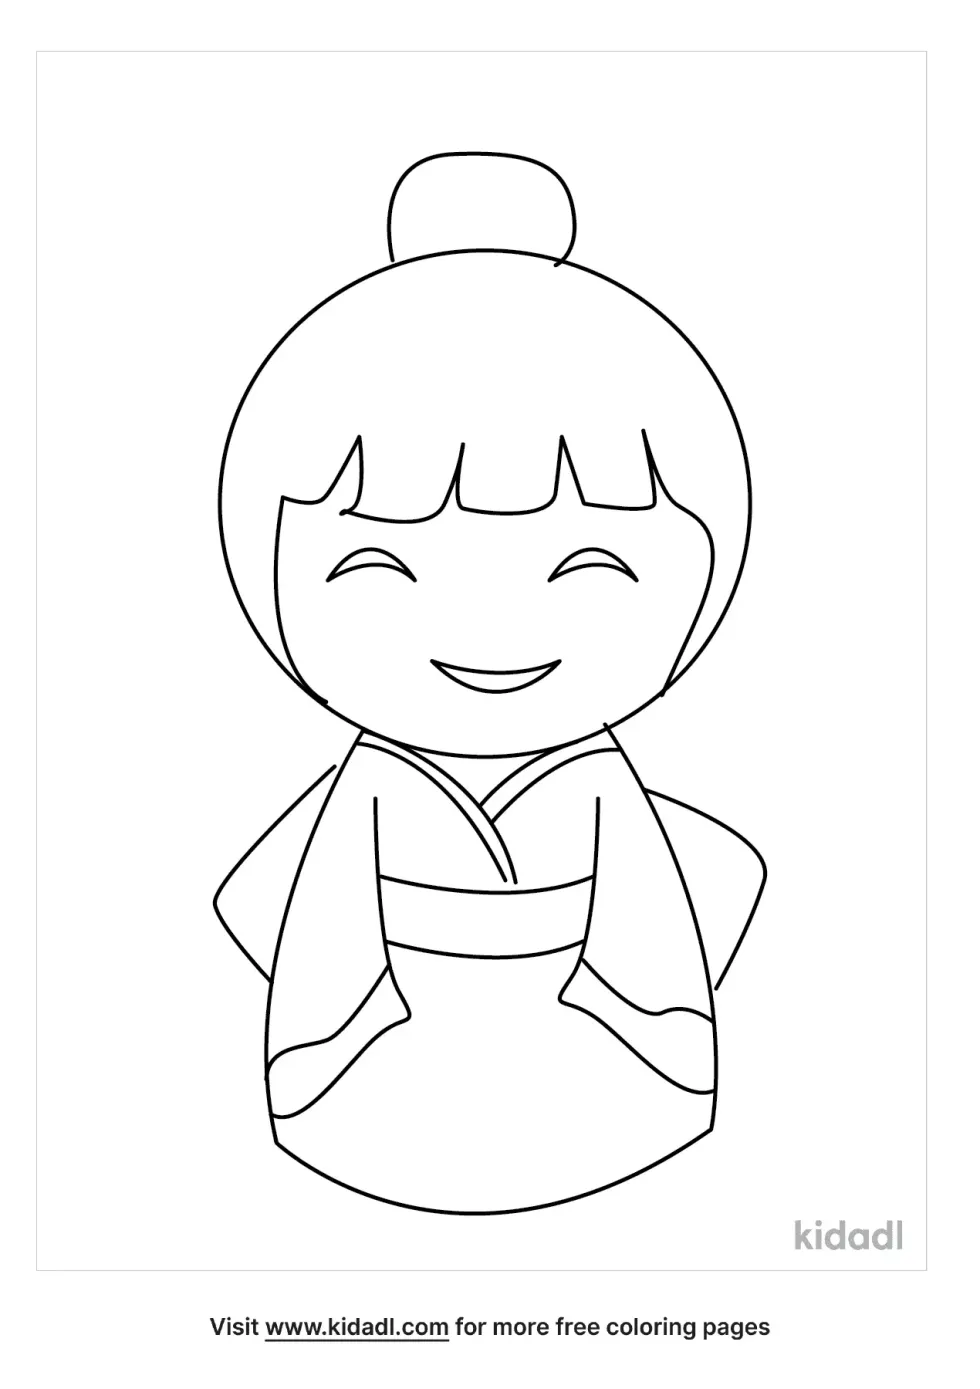 Japanese Doll Coloring Page